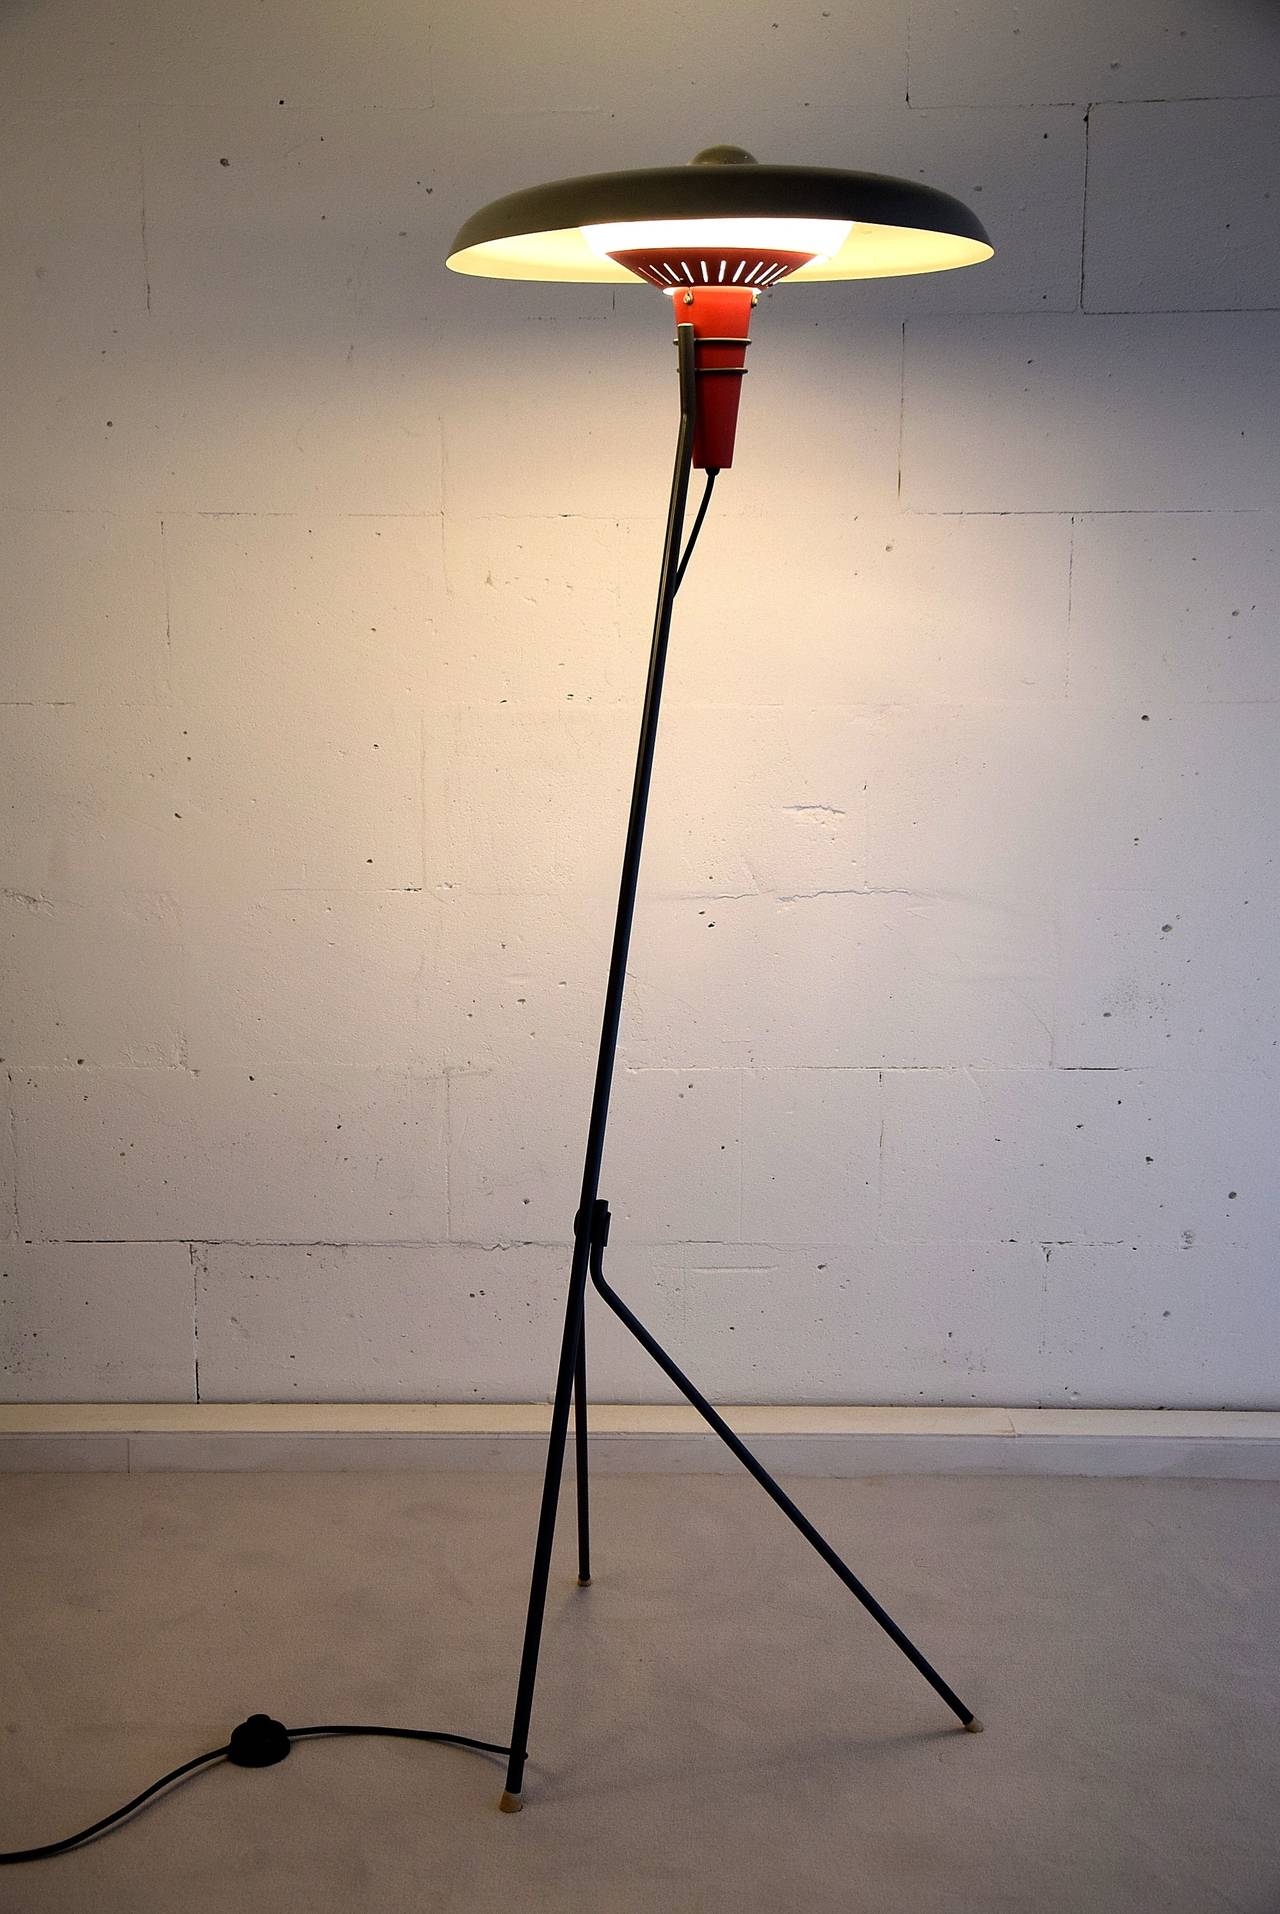 Louis Kalff Mid Century Modern Philips Floor Lamp
An architectural very rare floor lamp in enameled institutional grey with red and mid-grey accents. 
Wire structure supporting the disc shade and plexiglass diffuser.

The lamp is in very good